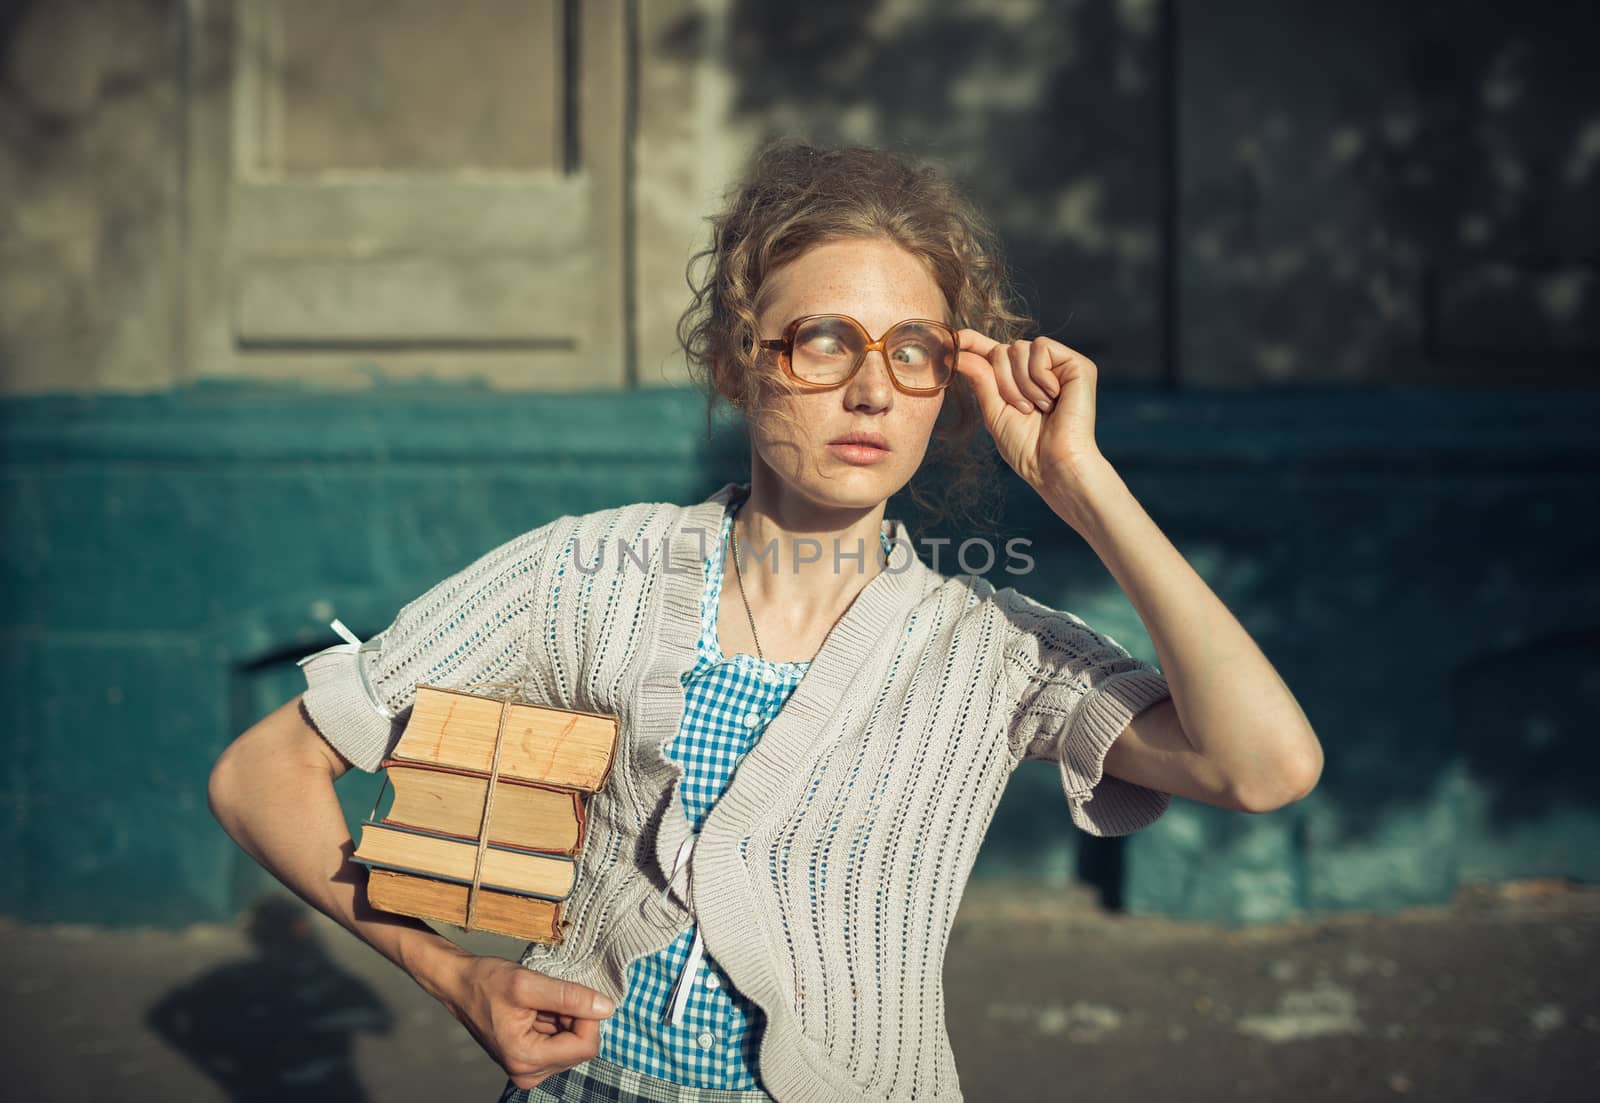 Funny girl student with books in glasses and a vintage dress by vlad_star